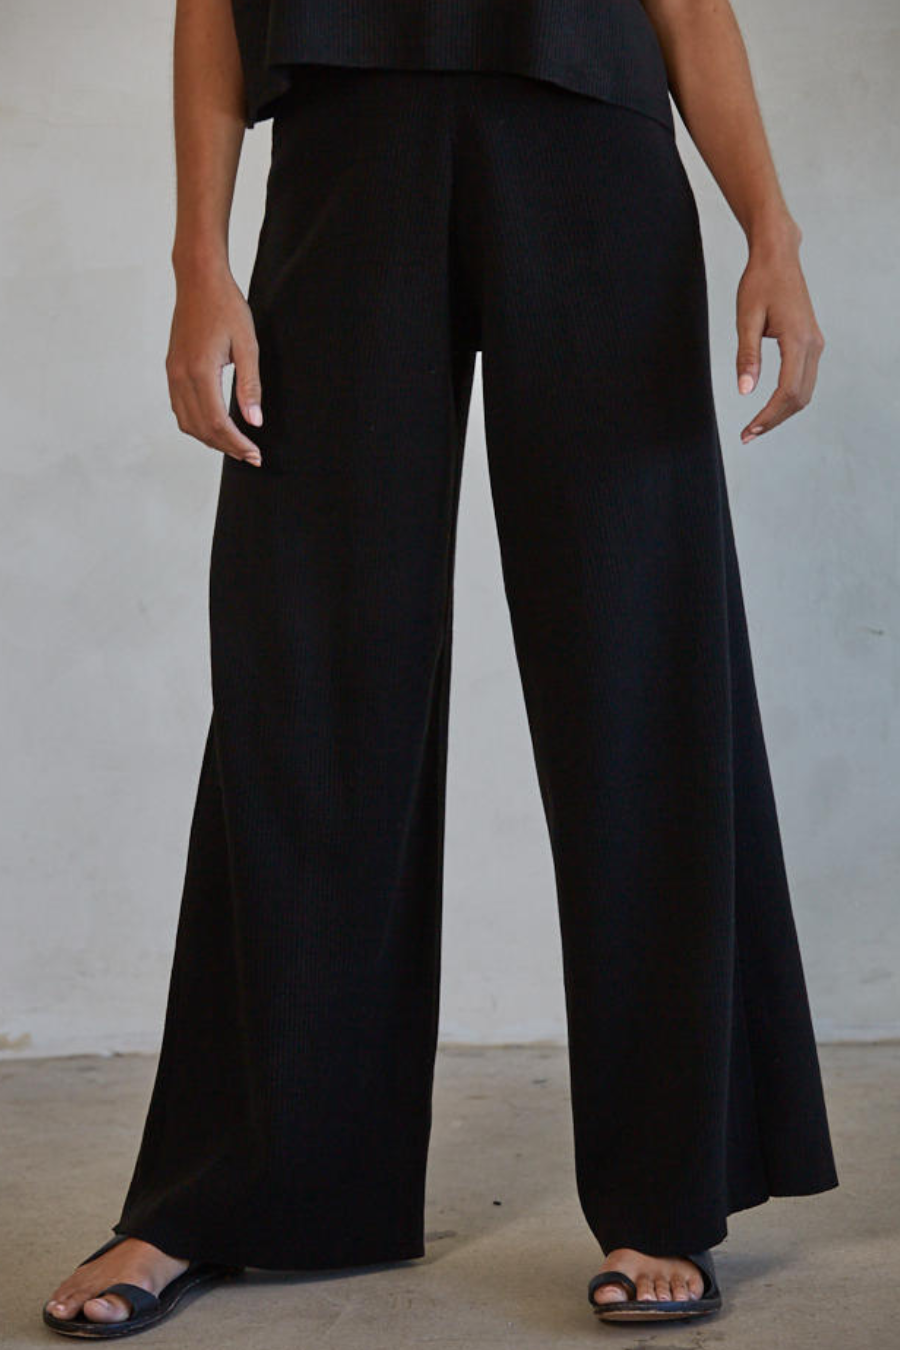 girl wearing black wide leg knit pant with sandals 